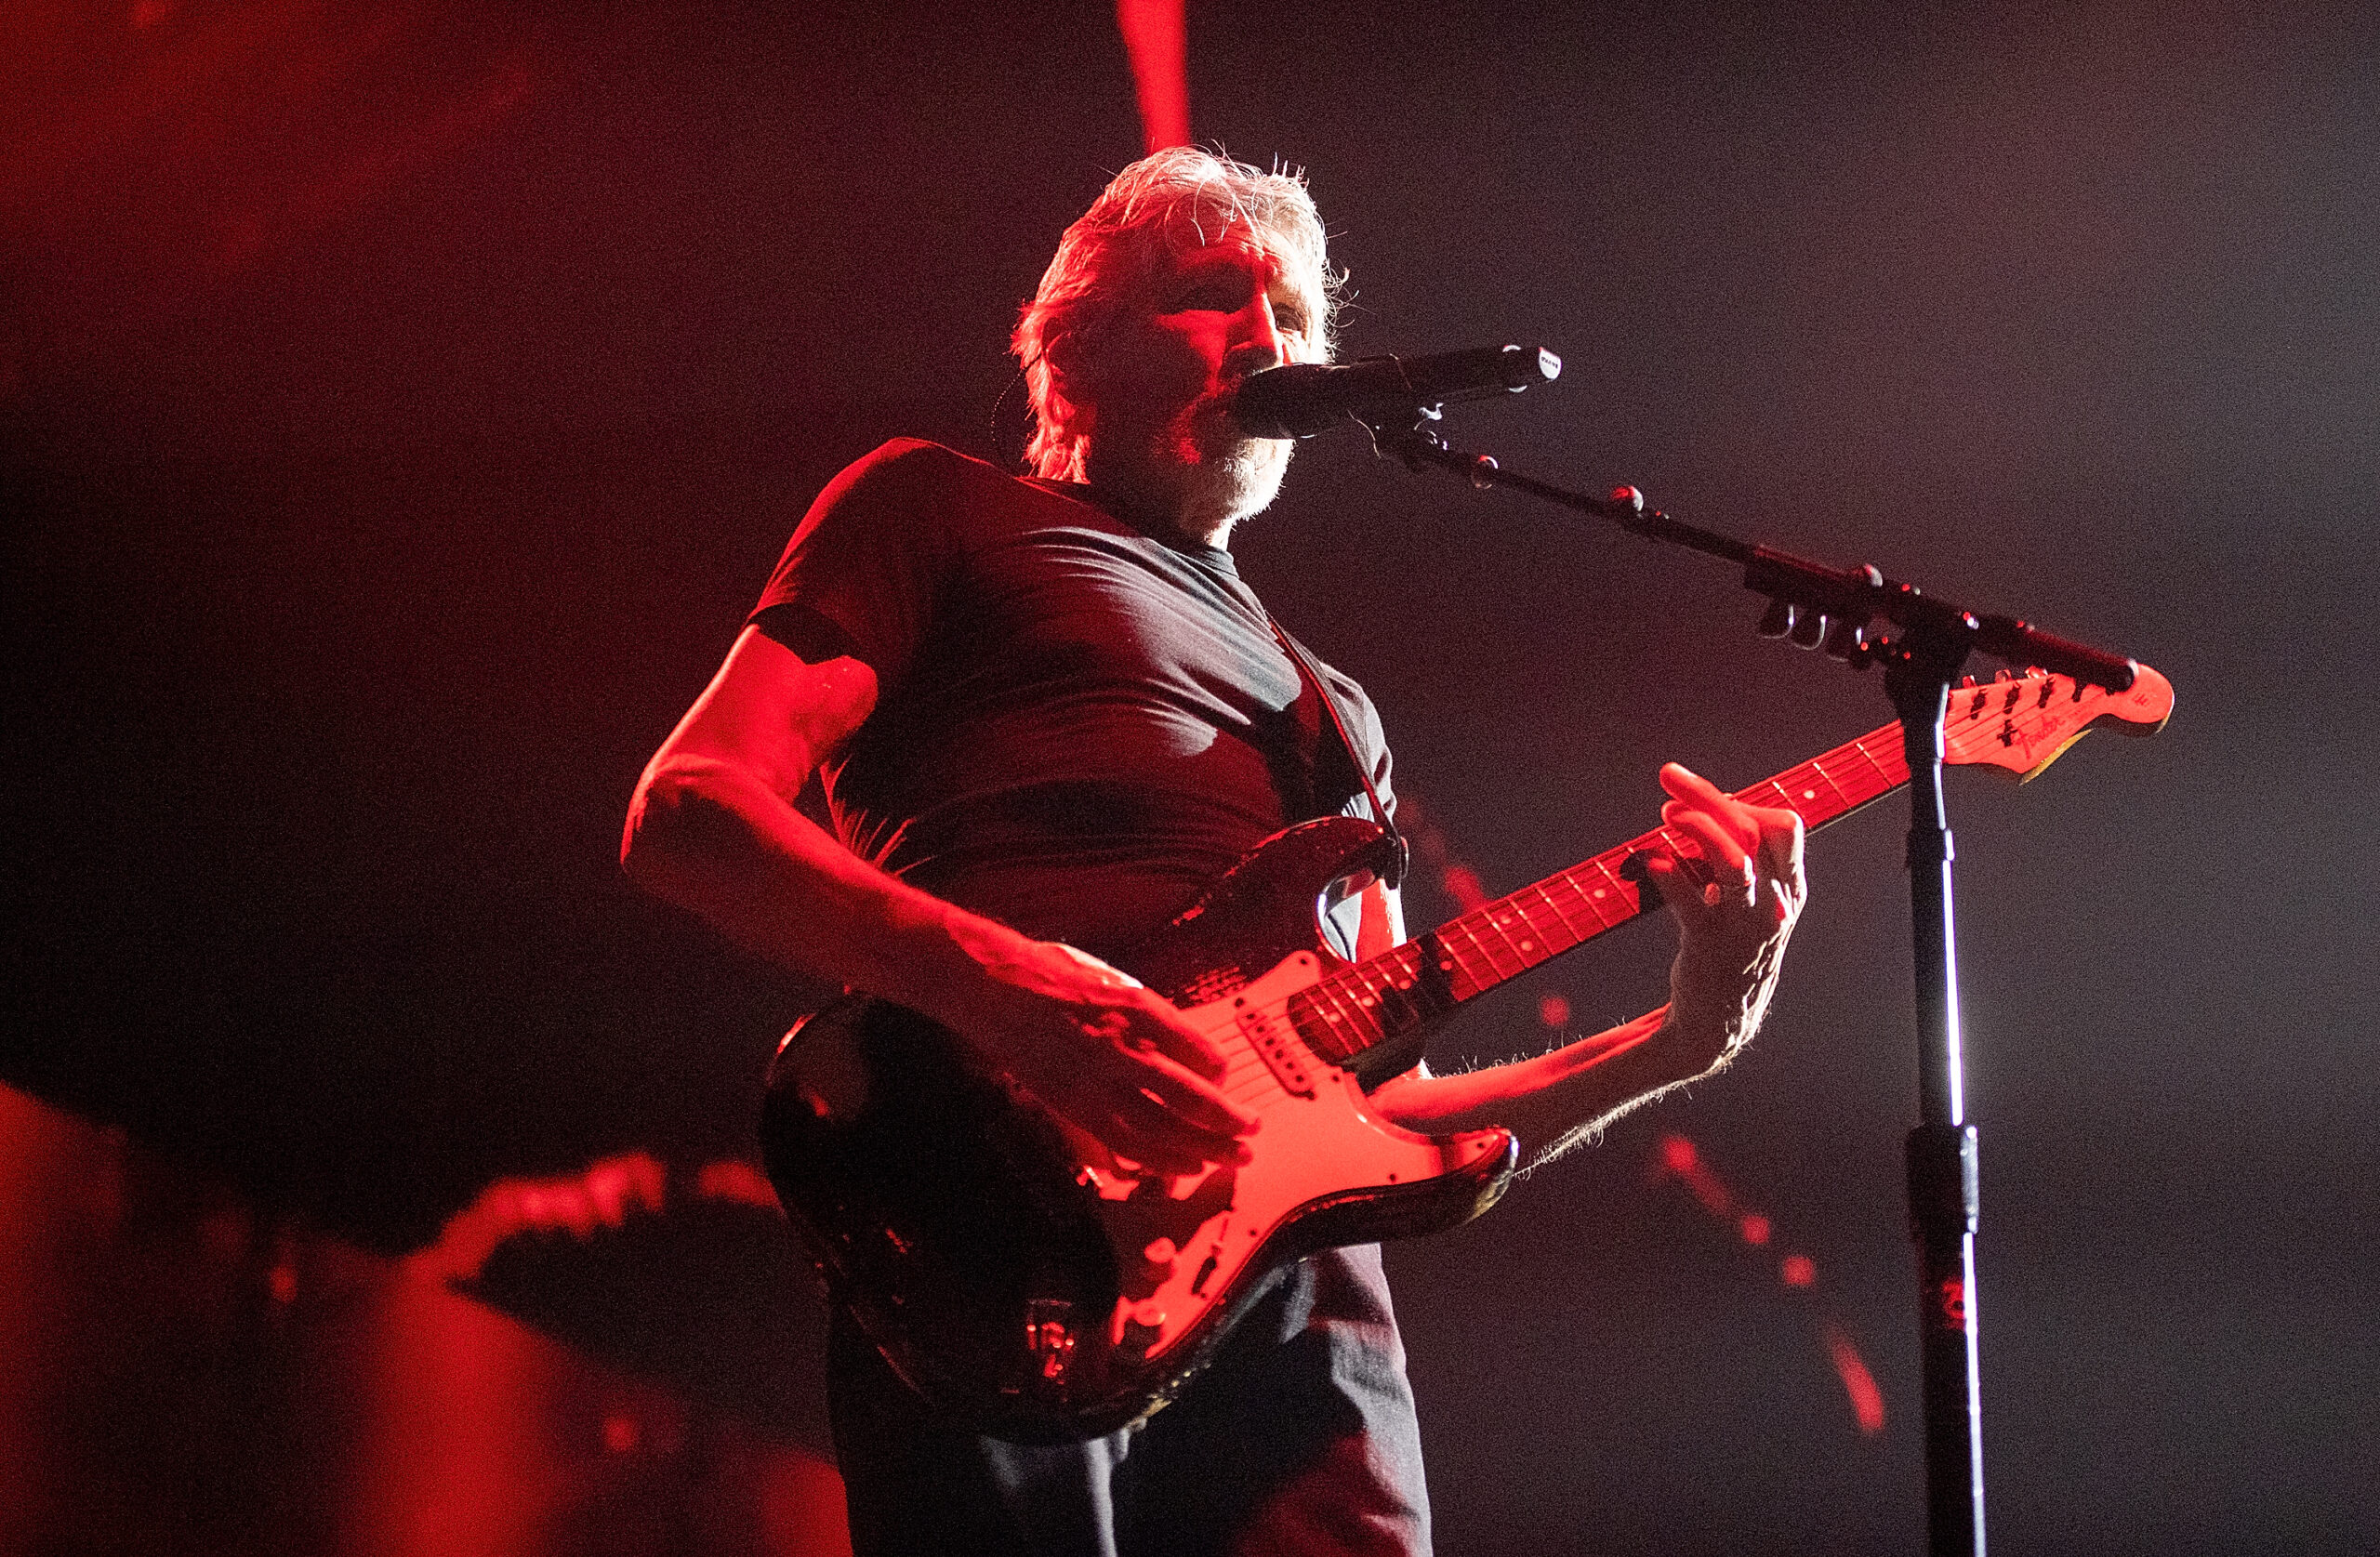 Roger Waters Considering Legal Action After David Gilmour's Wife Calls Him 'Misogynistic Putin Apologist'